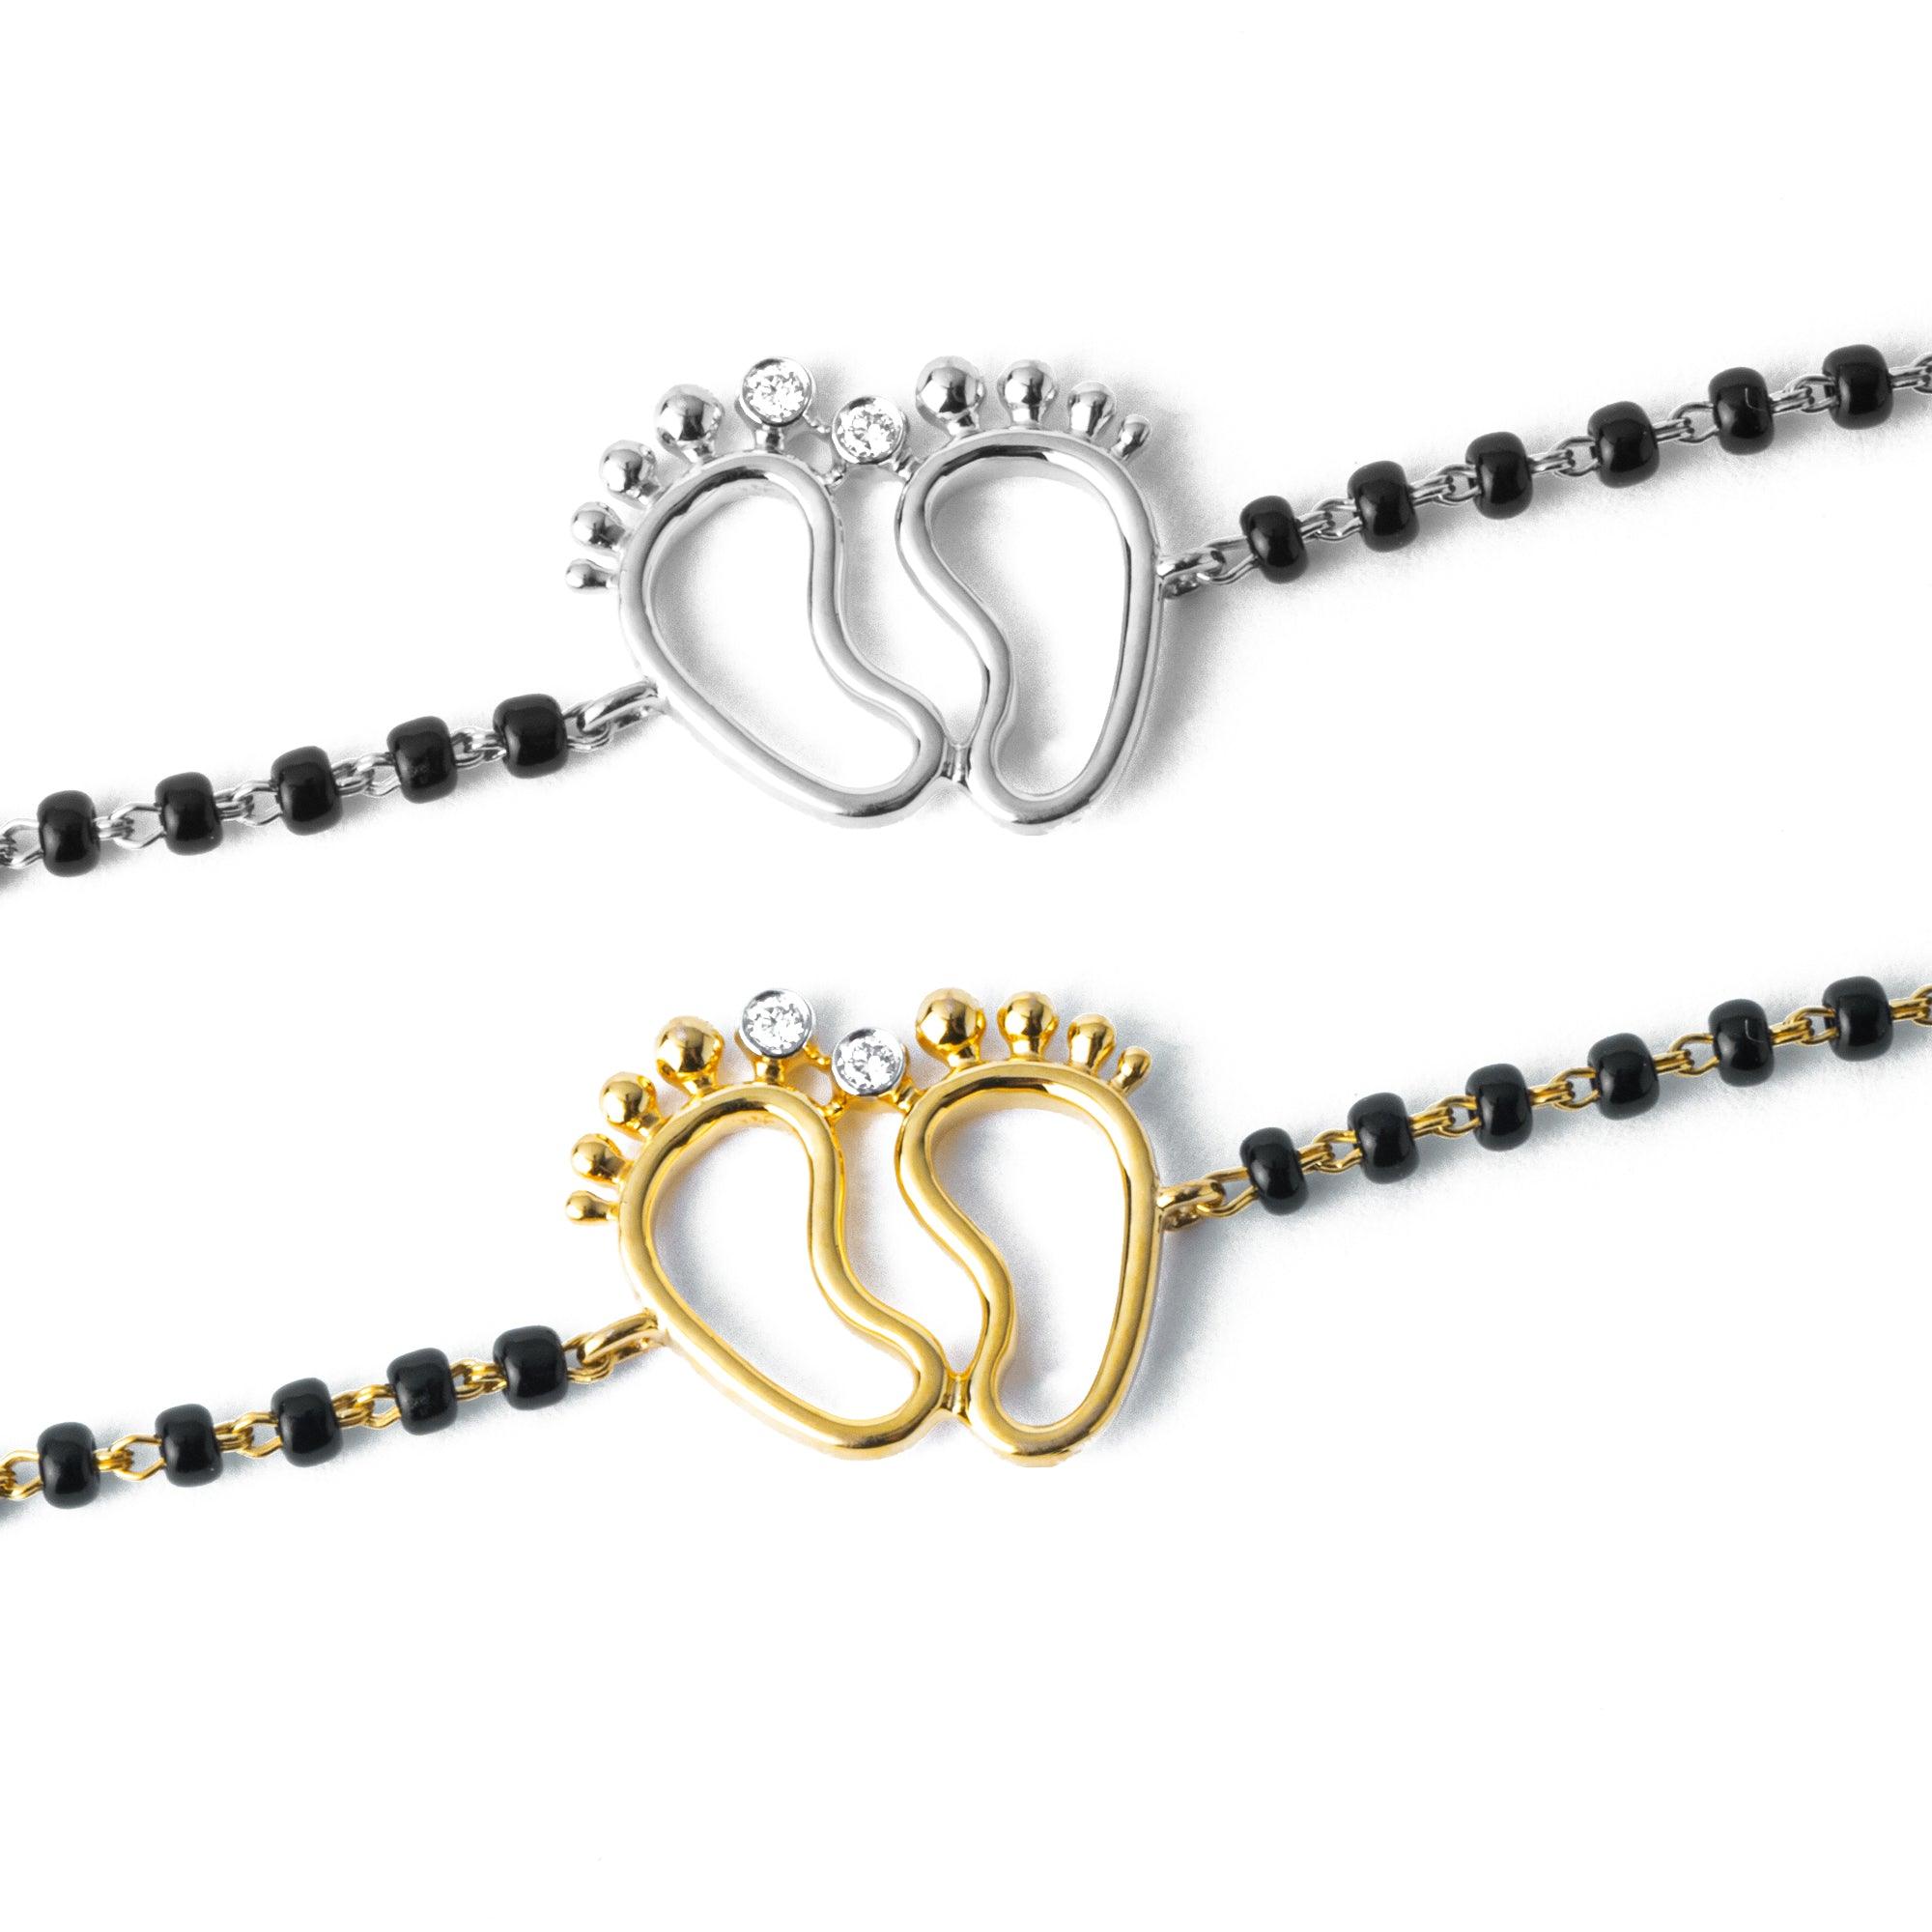 18ct Yellow Gold / 18ct White Gold Diamond Adjustable Children's Bracelet with Small Feet and Black Beads MCS4275 - Minar Jewellers